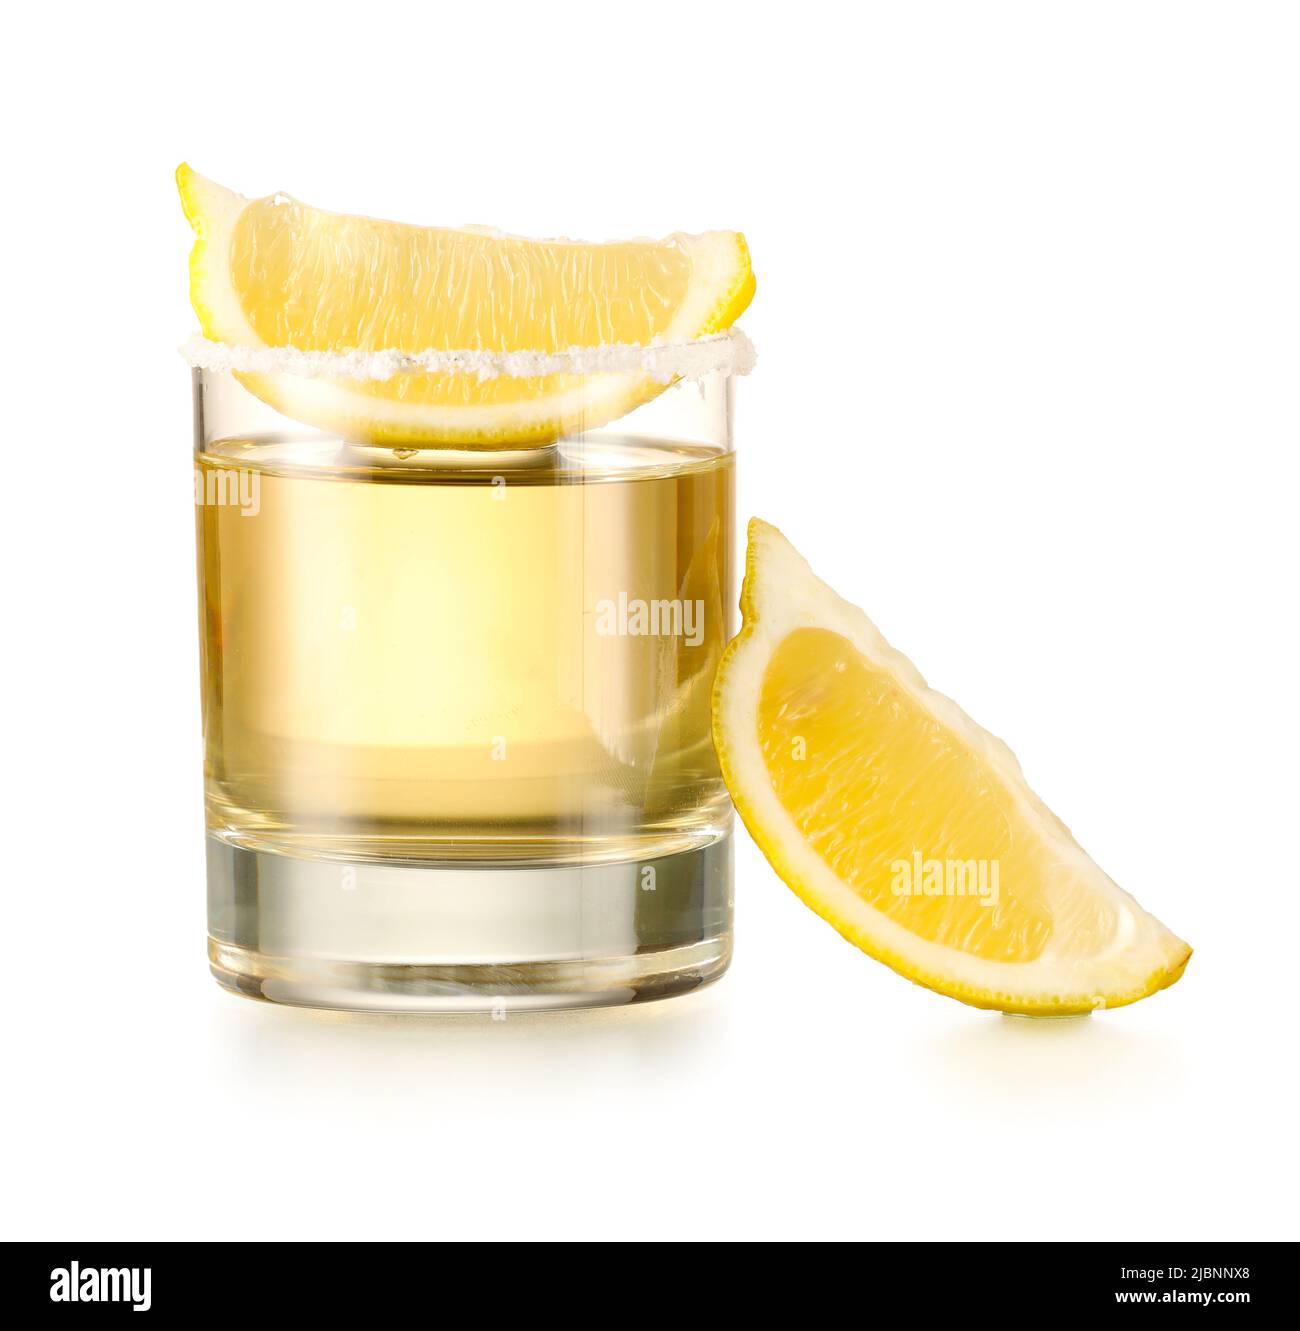 https://c8.alamy.com/comp/2JBNNX8/glass-of-tasty-mexican-tequila-with-lemon-on-white-background-2JBNNX8.jpg